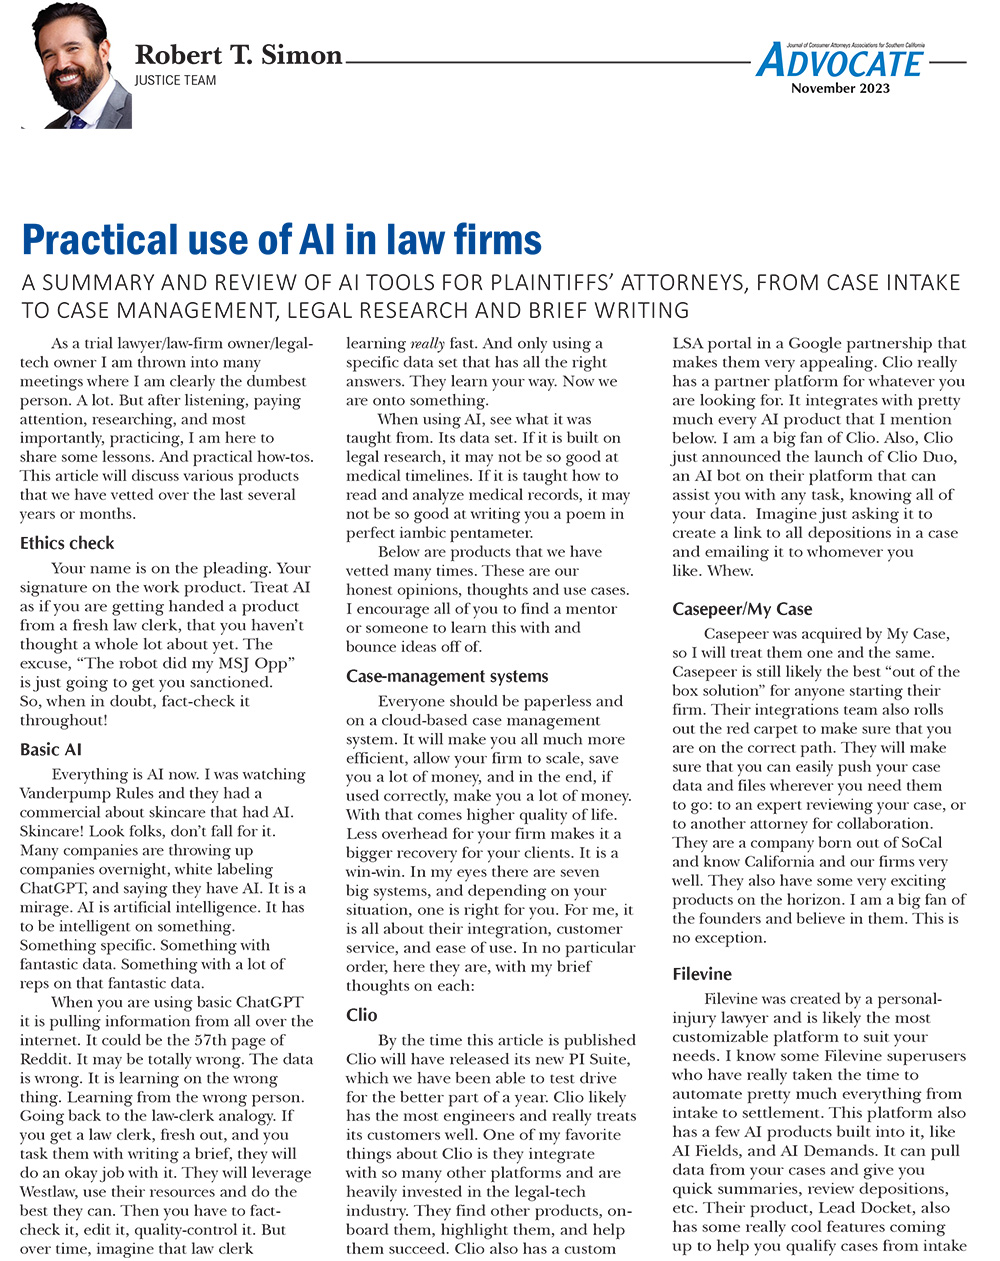 Practical use of AI in law firms